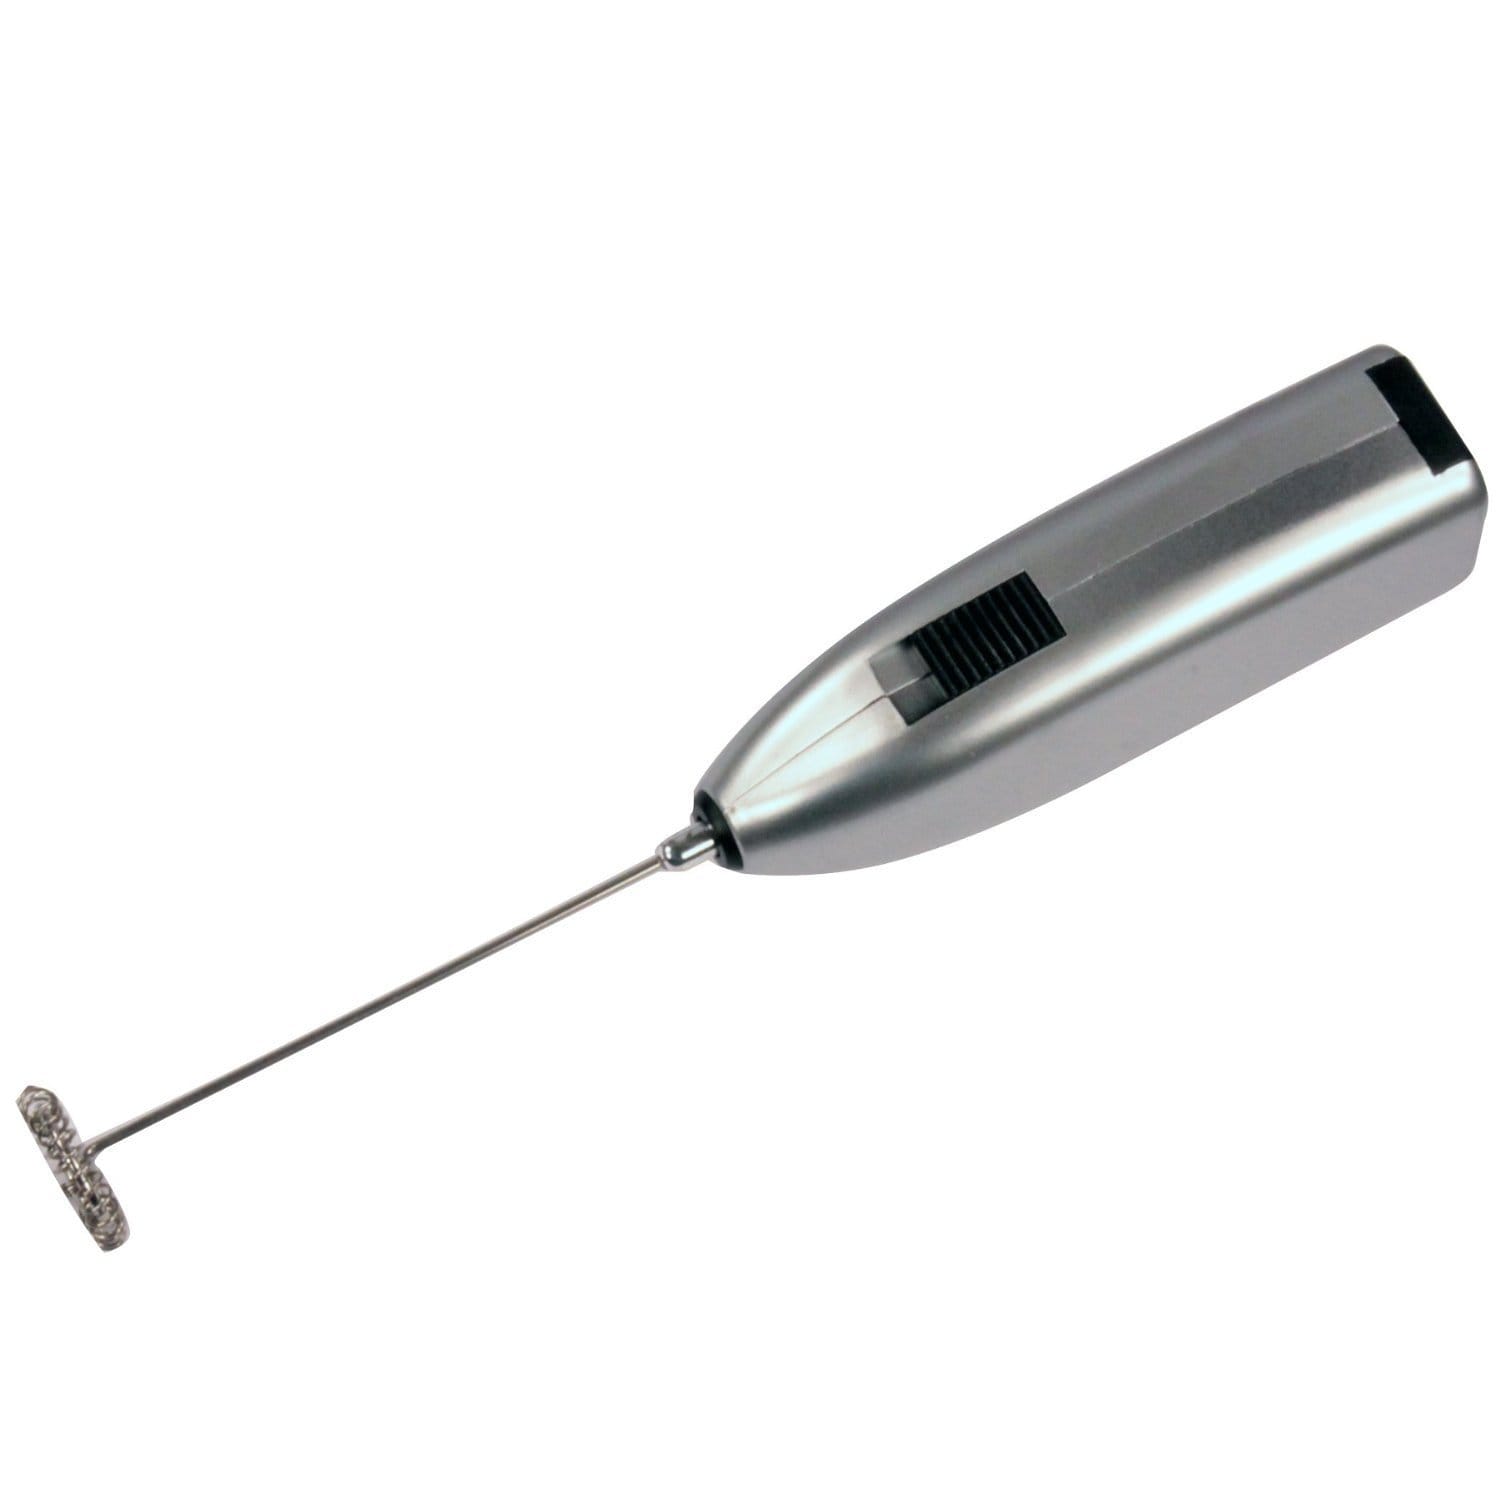 https://ak1.ostkcdn.com/images/products/11717831/Knox-Handheld-Milk-Frother-Silver-4a434dae-28b6-4aac-9ed5-6f859d77fa0e.jpg